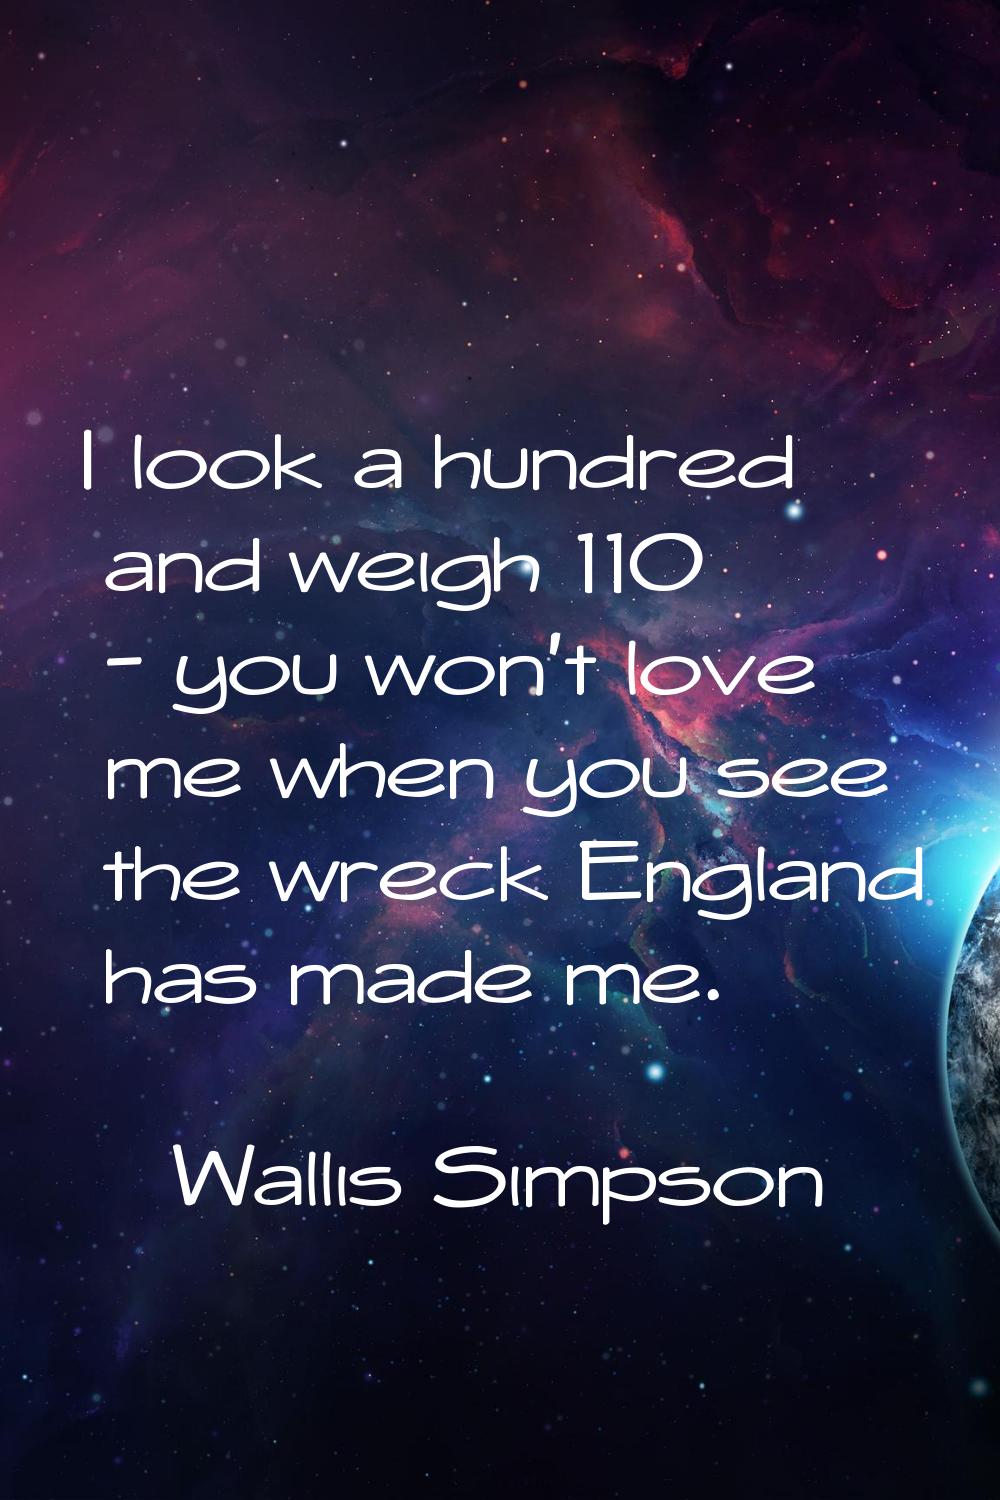 I look a hundred and weigh 110 - you won't love me when you see the wreck England has made me.